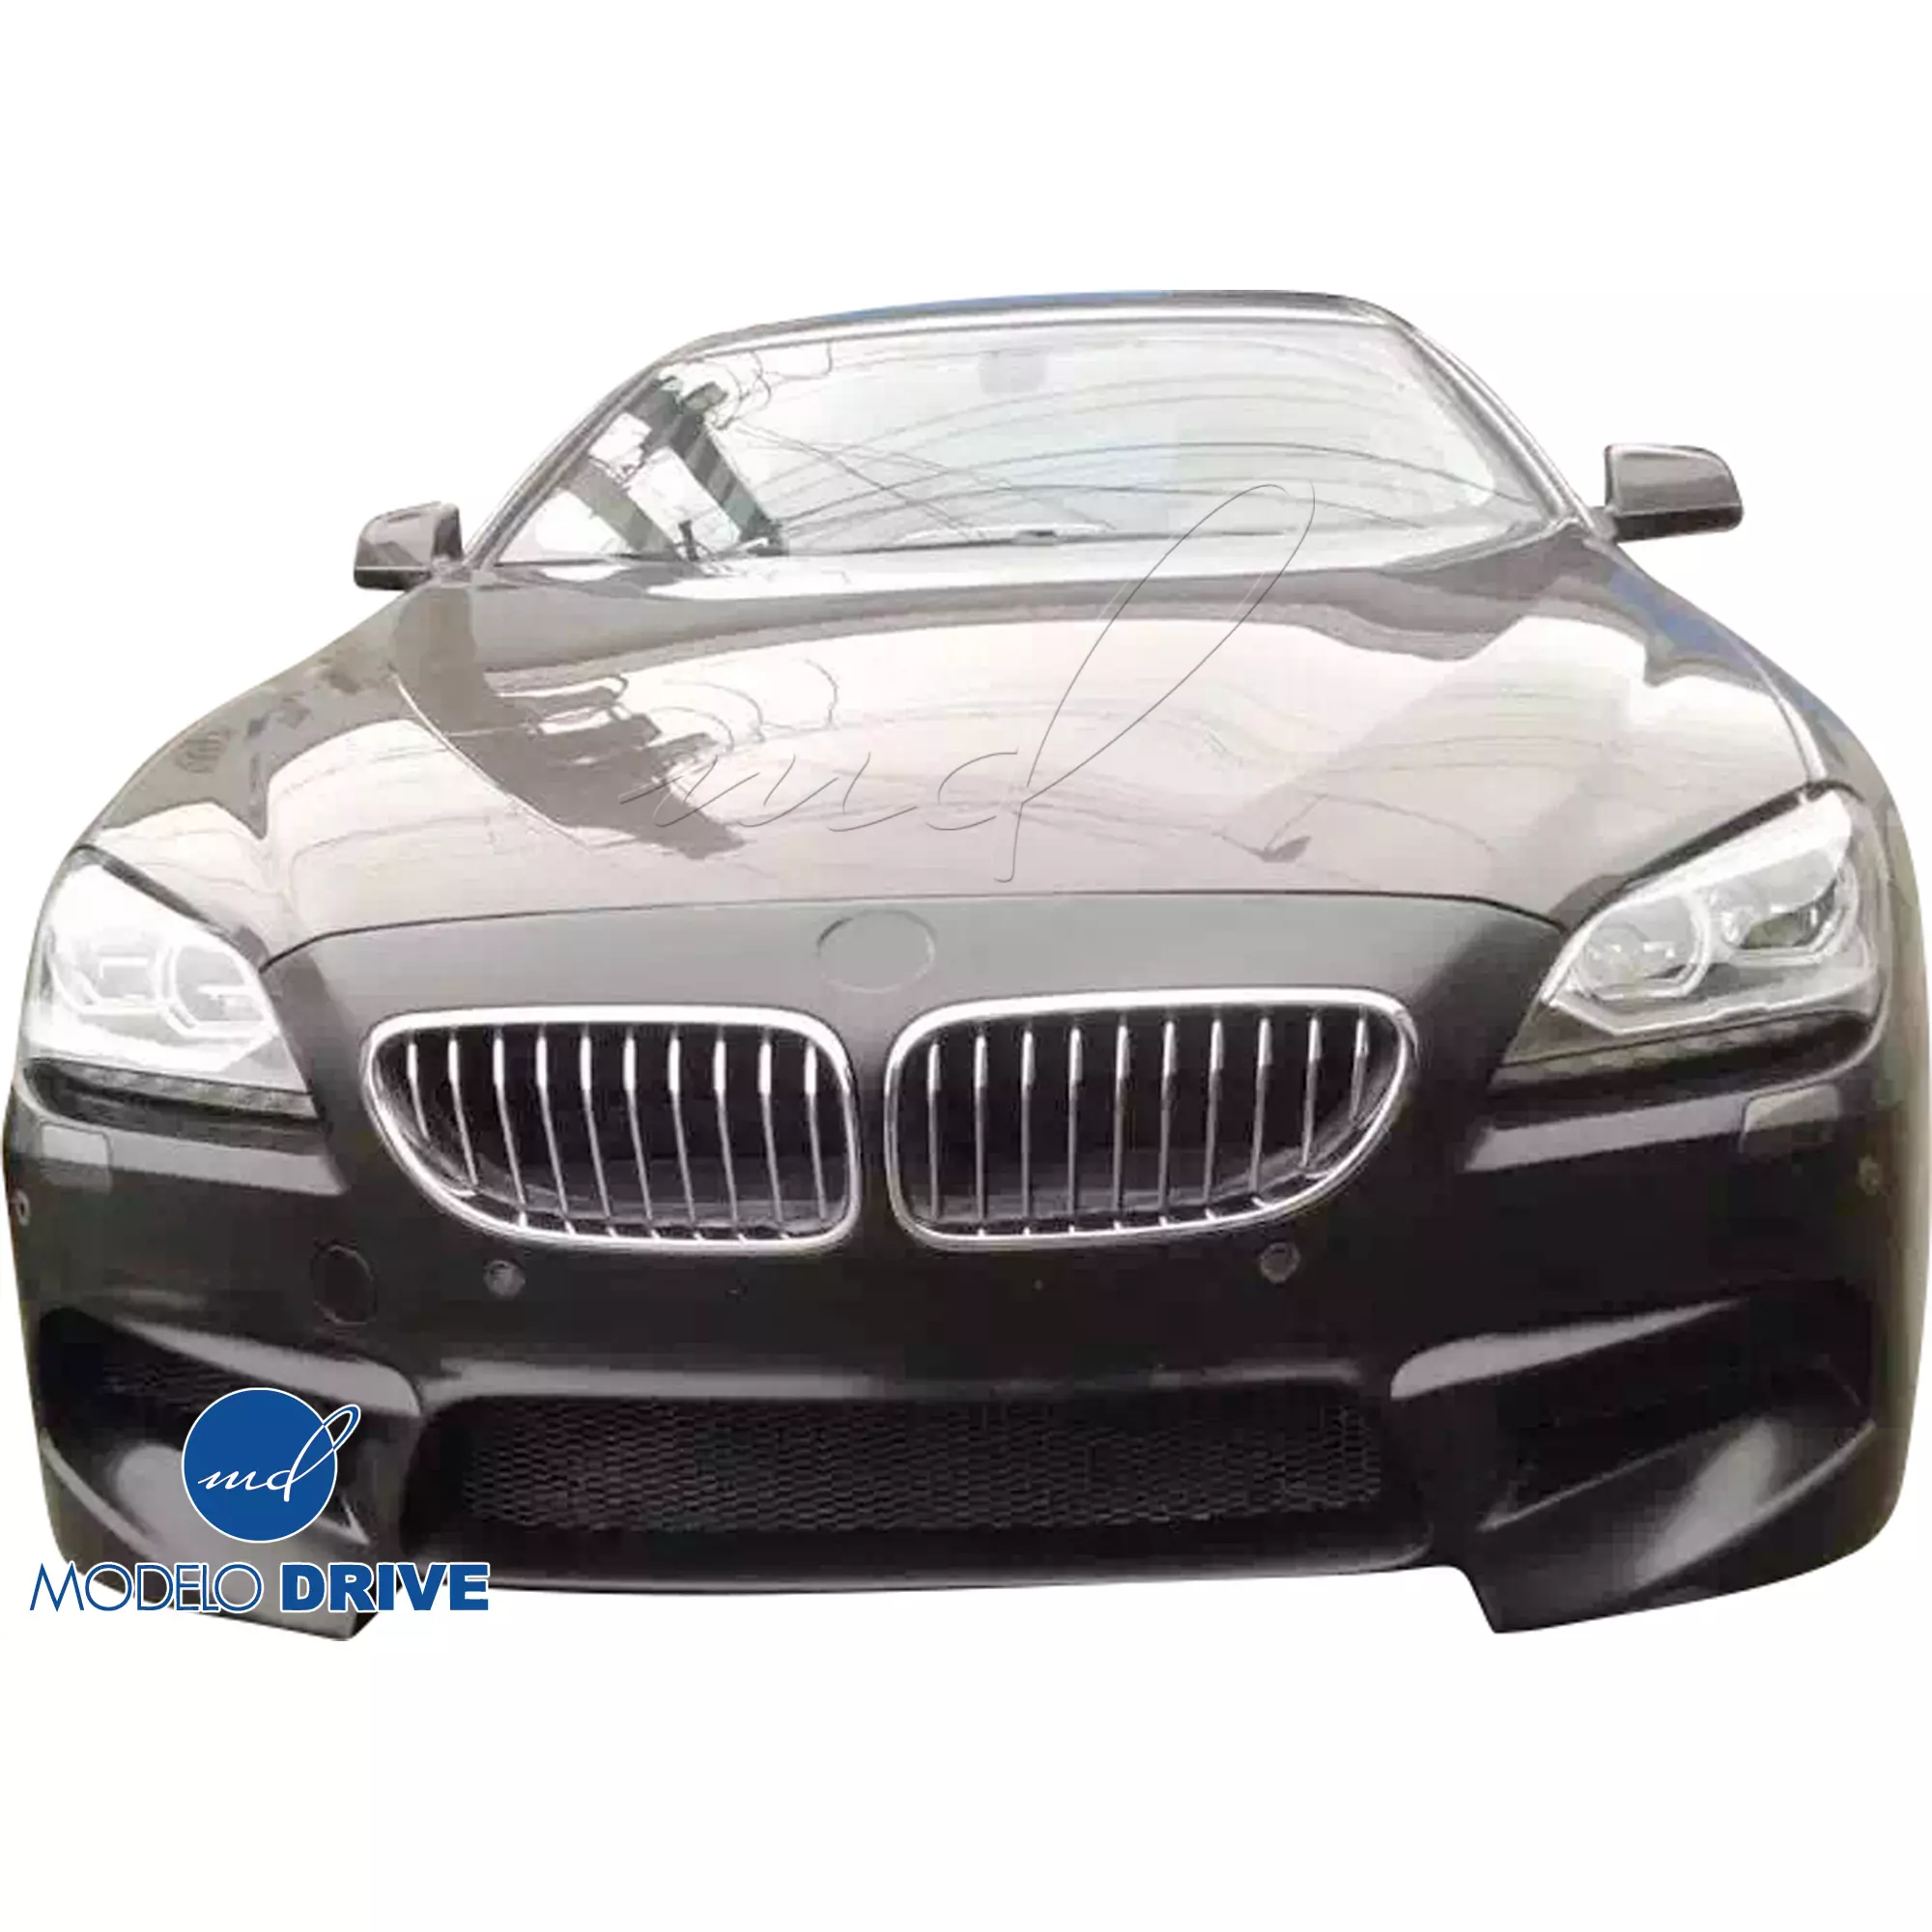 ModeloDrive FRP M6-Style Front Bumper > BMW 6-Series 2008-2014 - Image 5